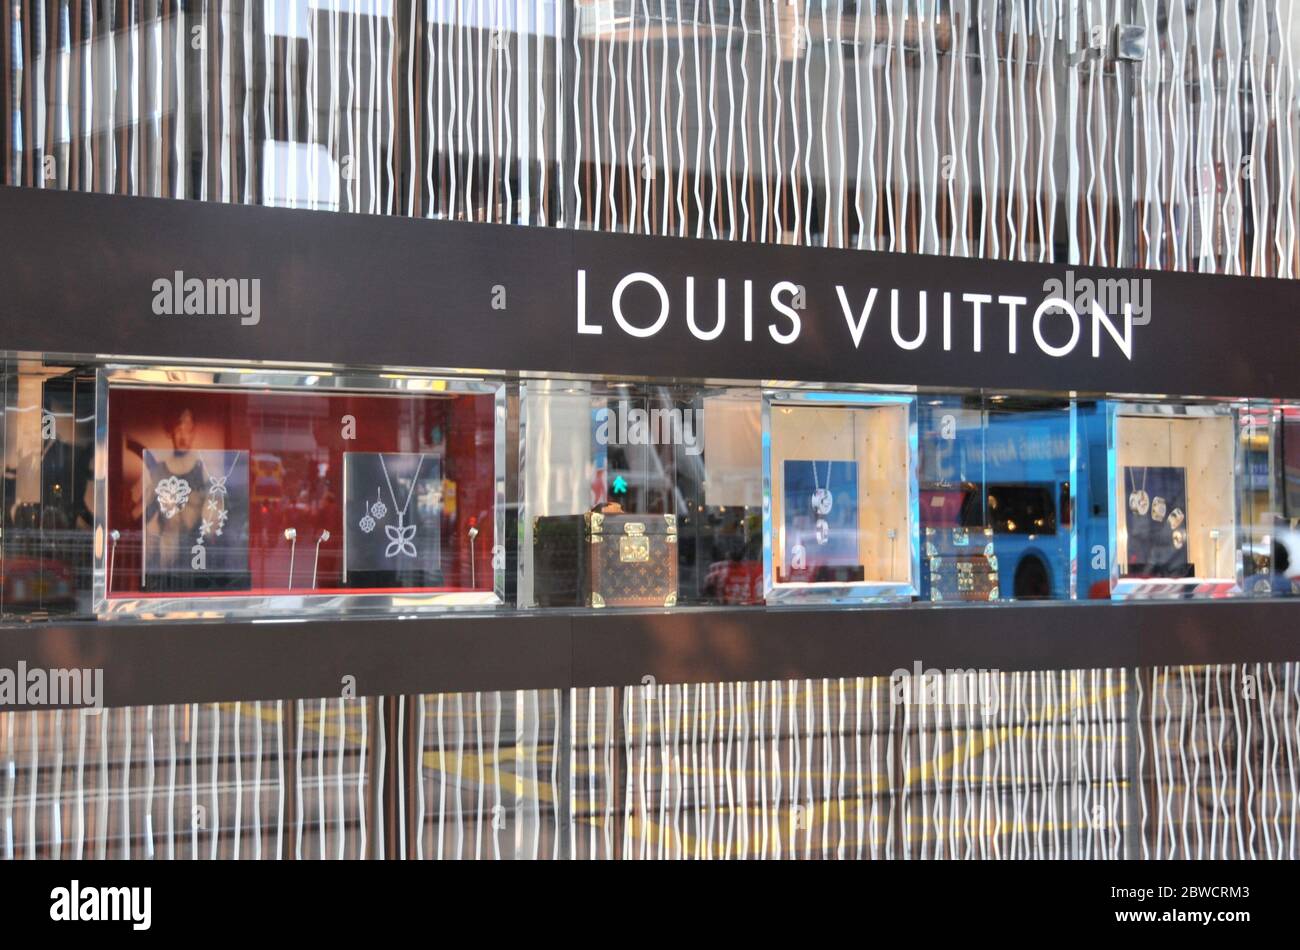 Louis vuitton images hi-res stock photography and images - Alamy